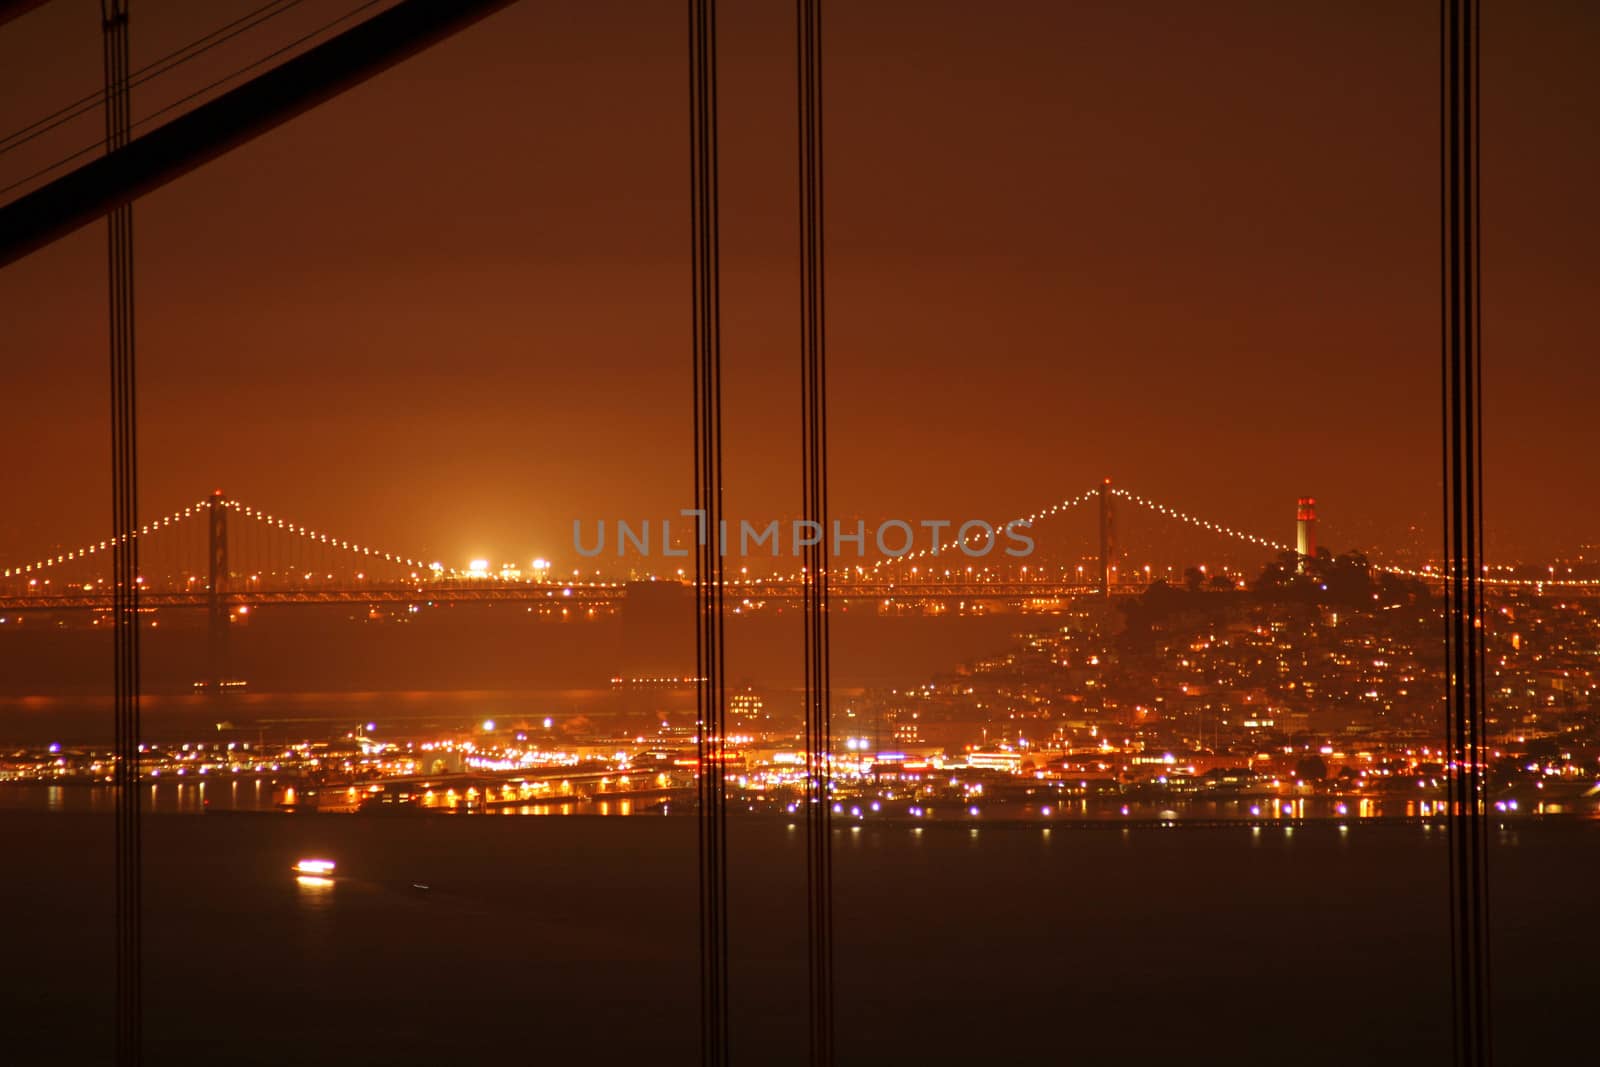 Bay Bridge seen from the Golden Gate Bridge at night by CelsoDiniz